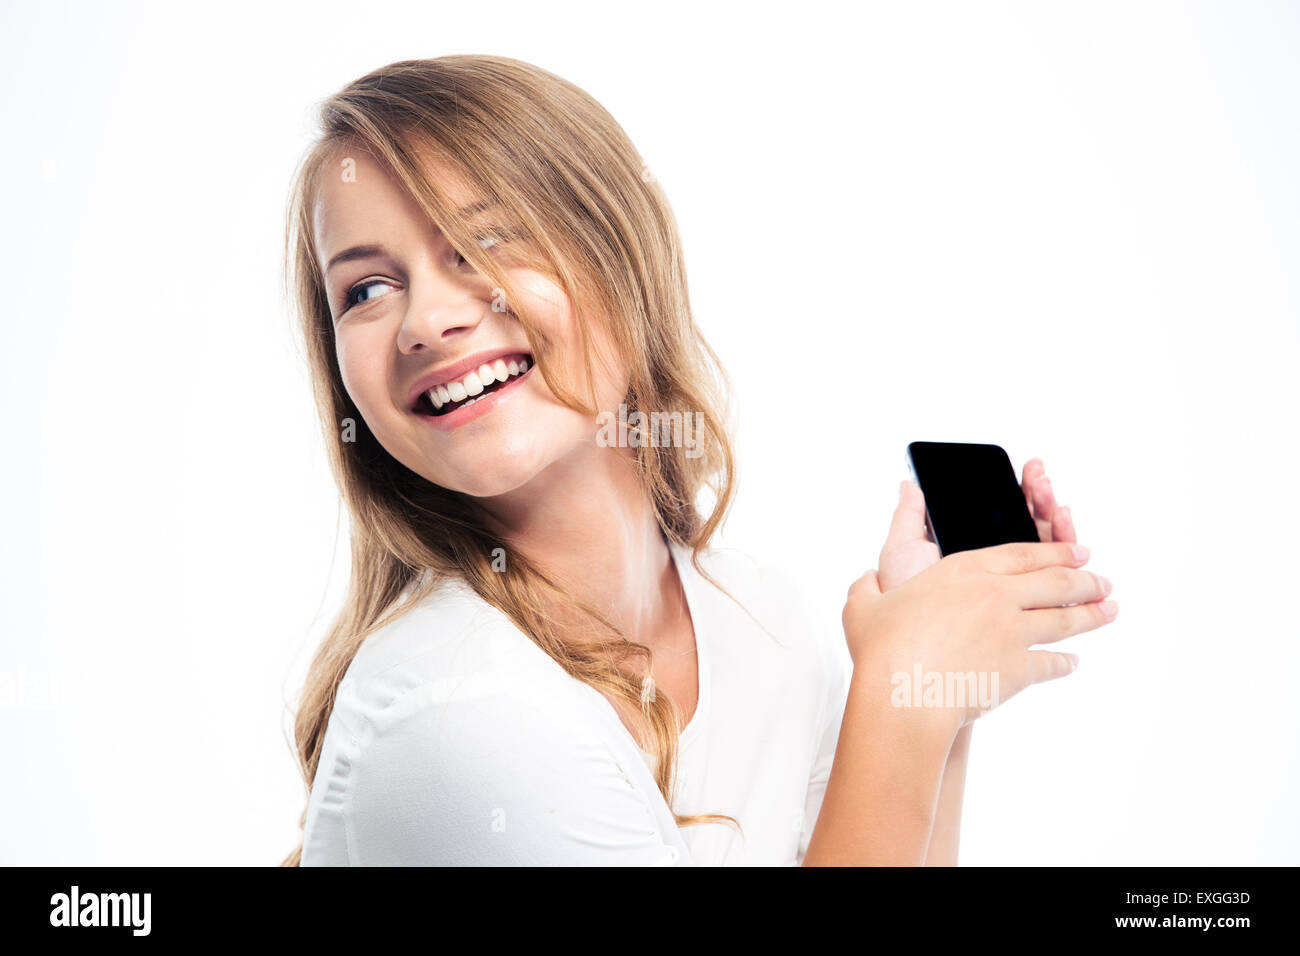 Smiling young girl holding smartphone isolated on a white background. Looking away Stock Photo